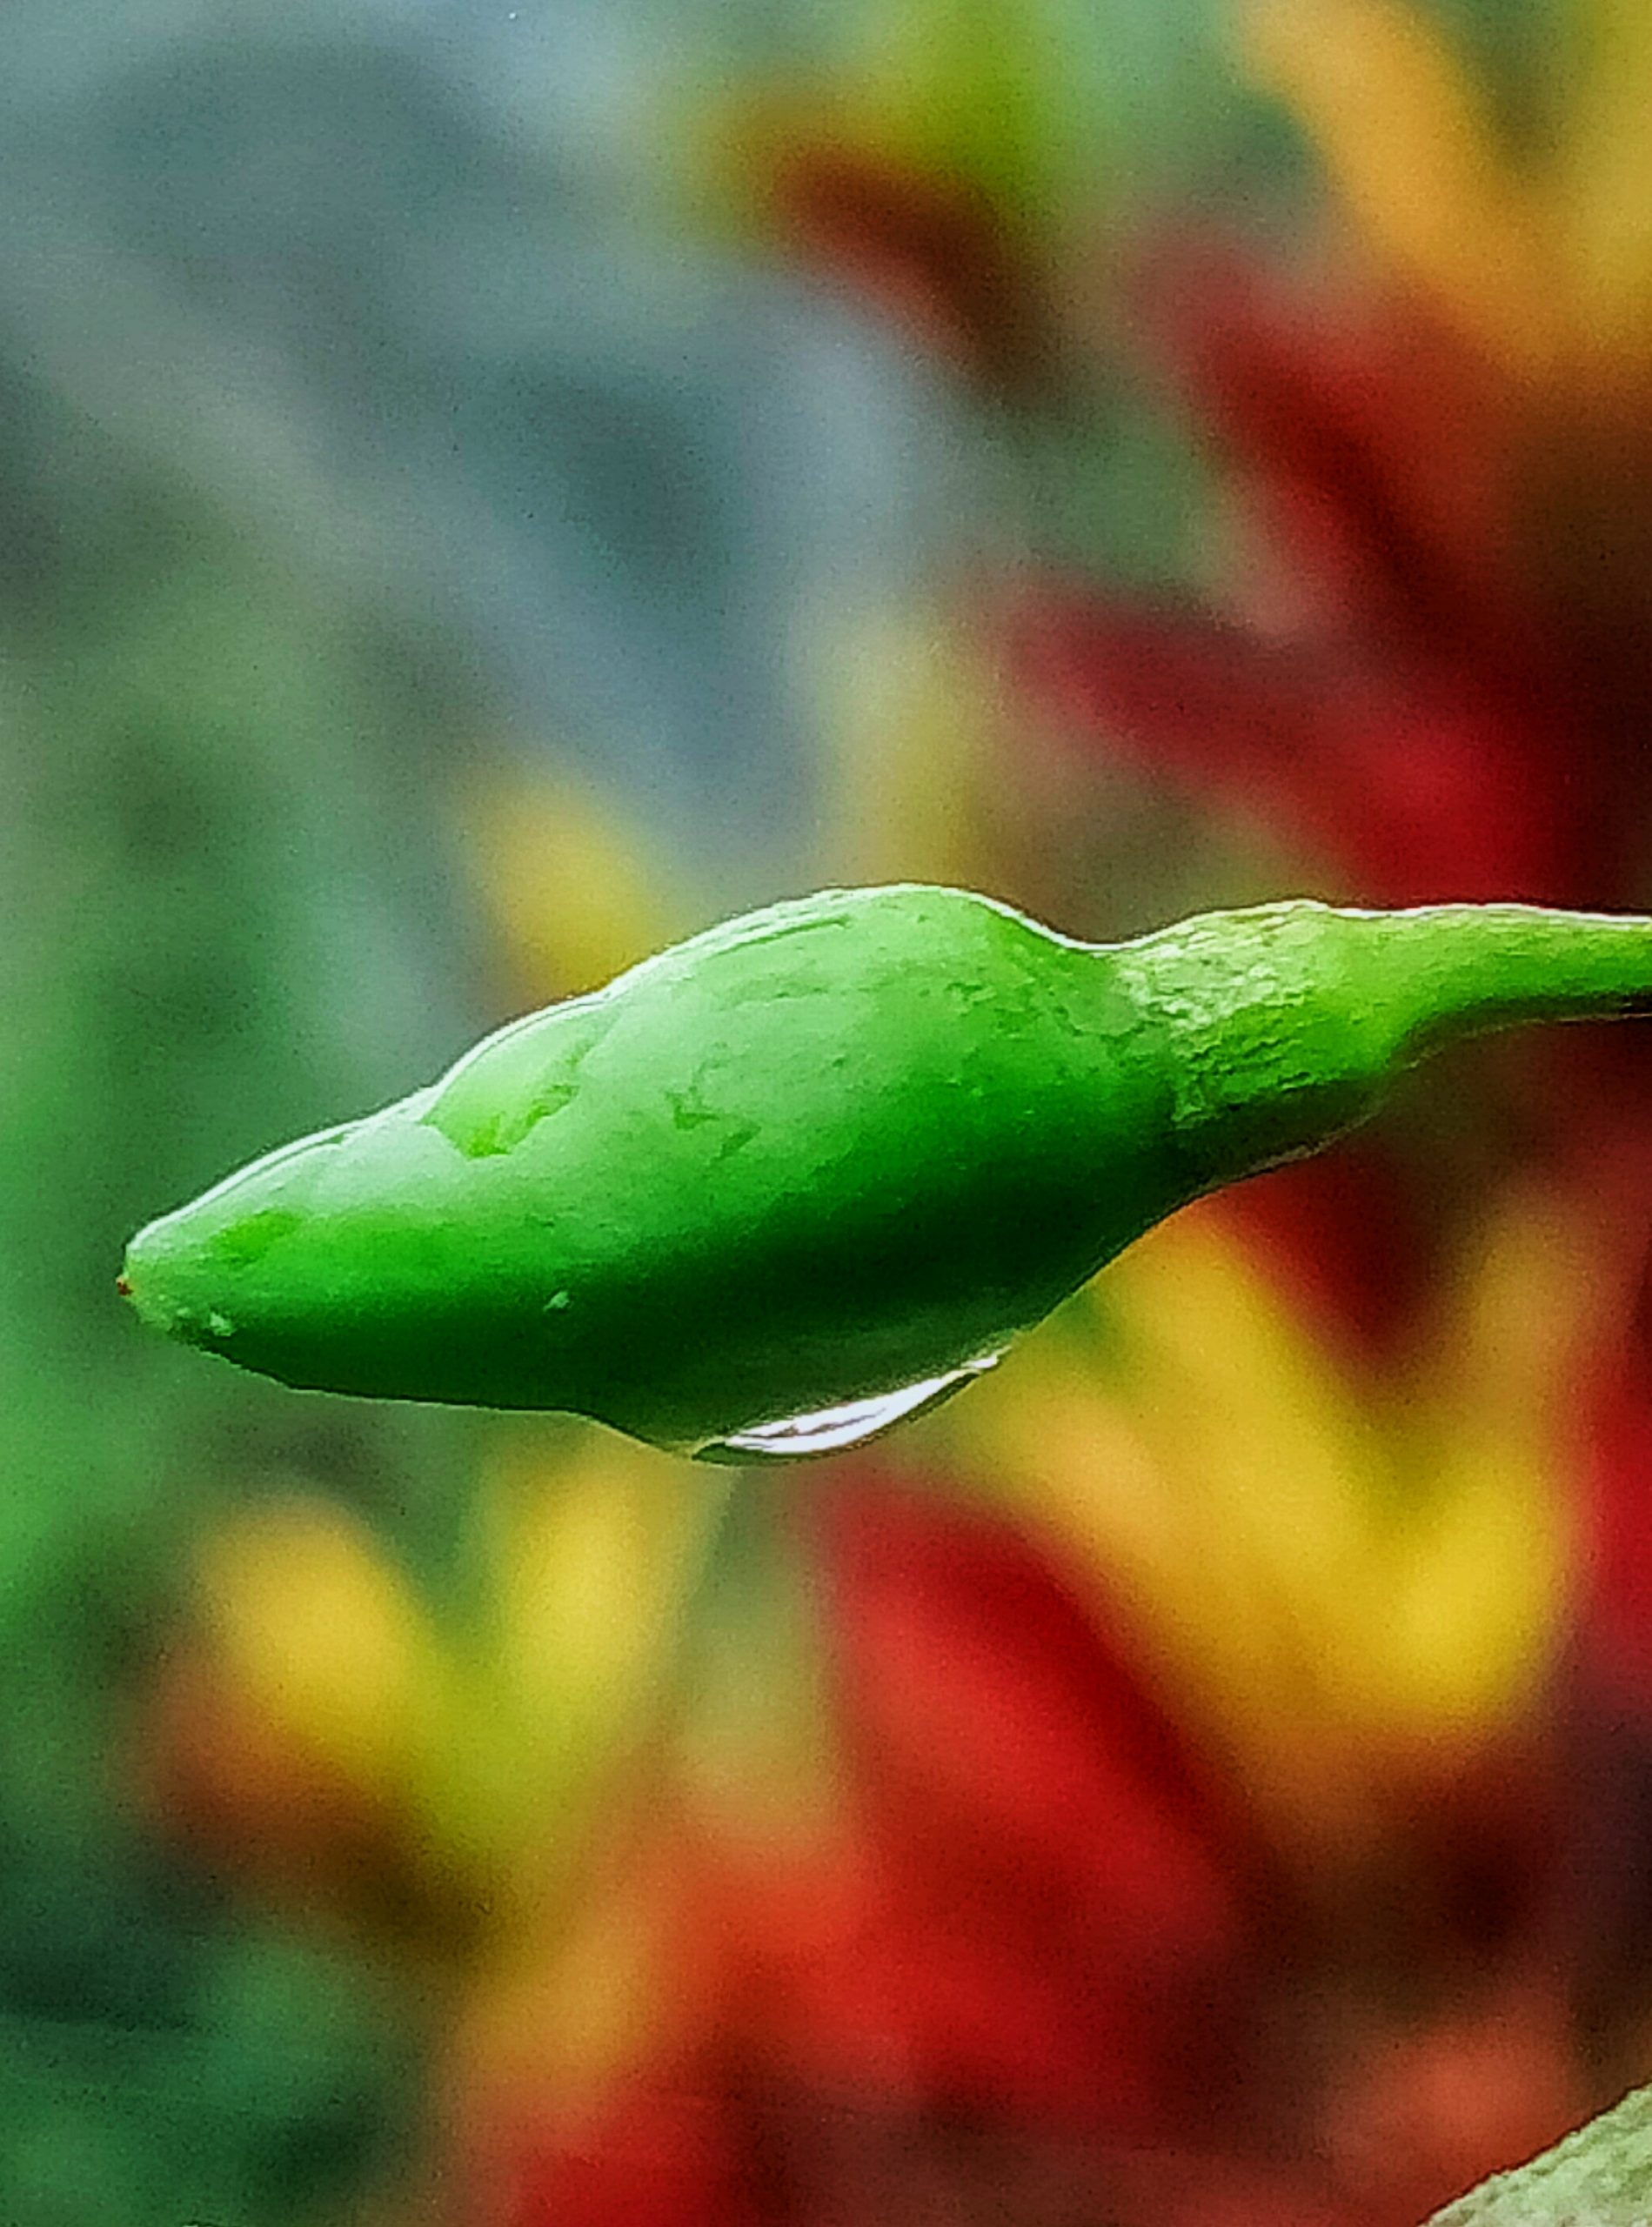 waterdrop on green chilly